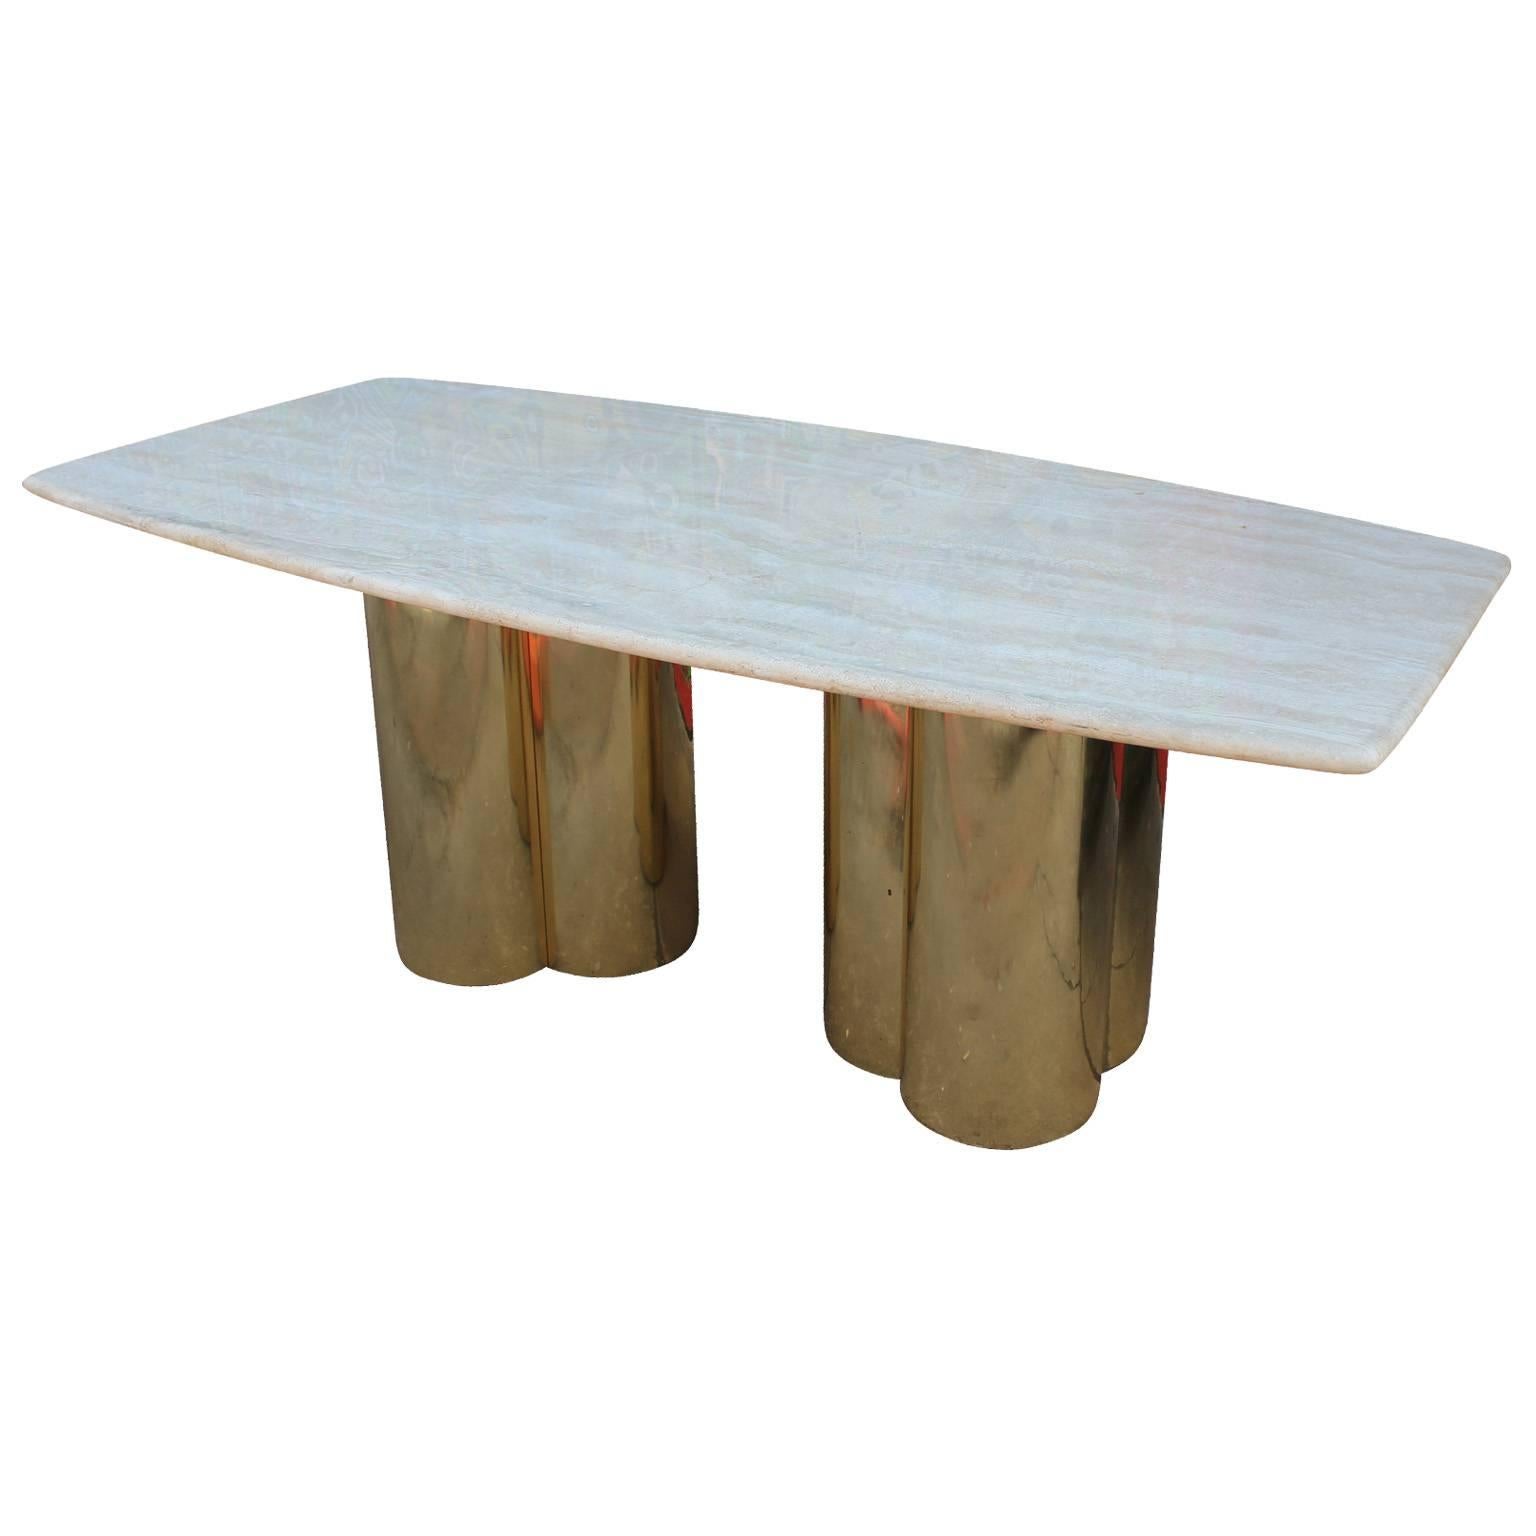 Glamorous Brass Pedestal and Travertine Dining Table